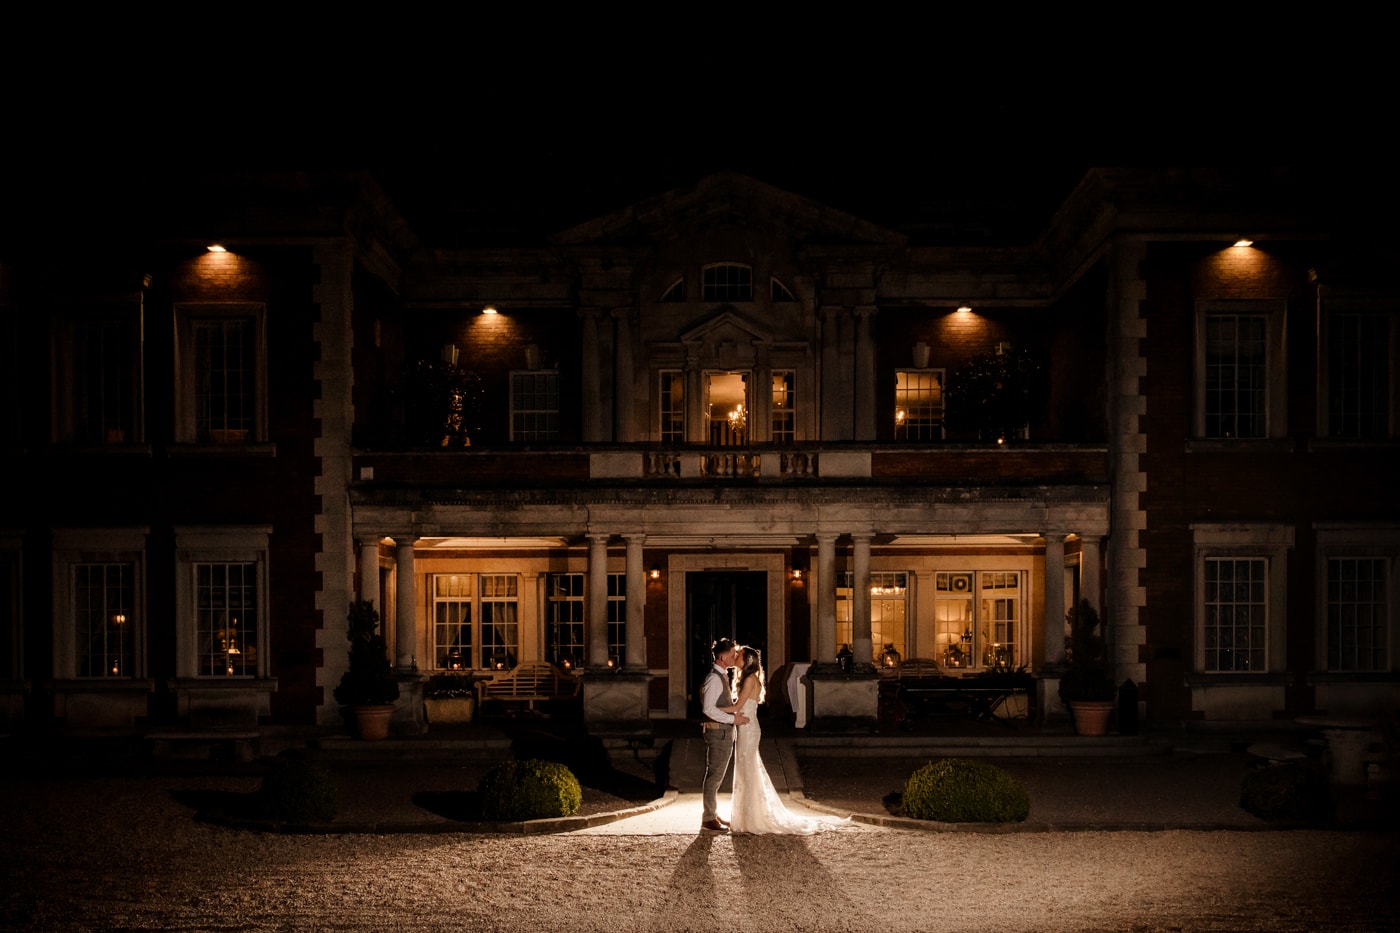 Lauren and patrick at Eaves Hall in cheshire outside for their evening photograph outside the historic manor house